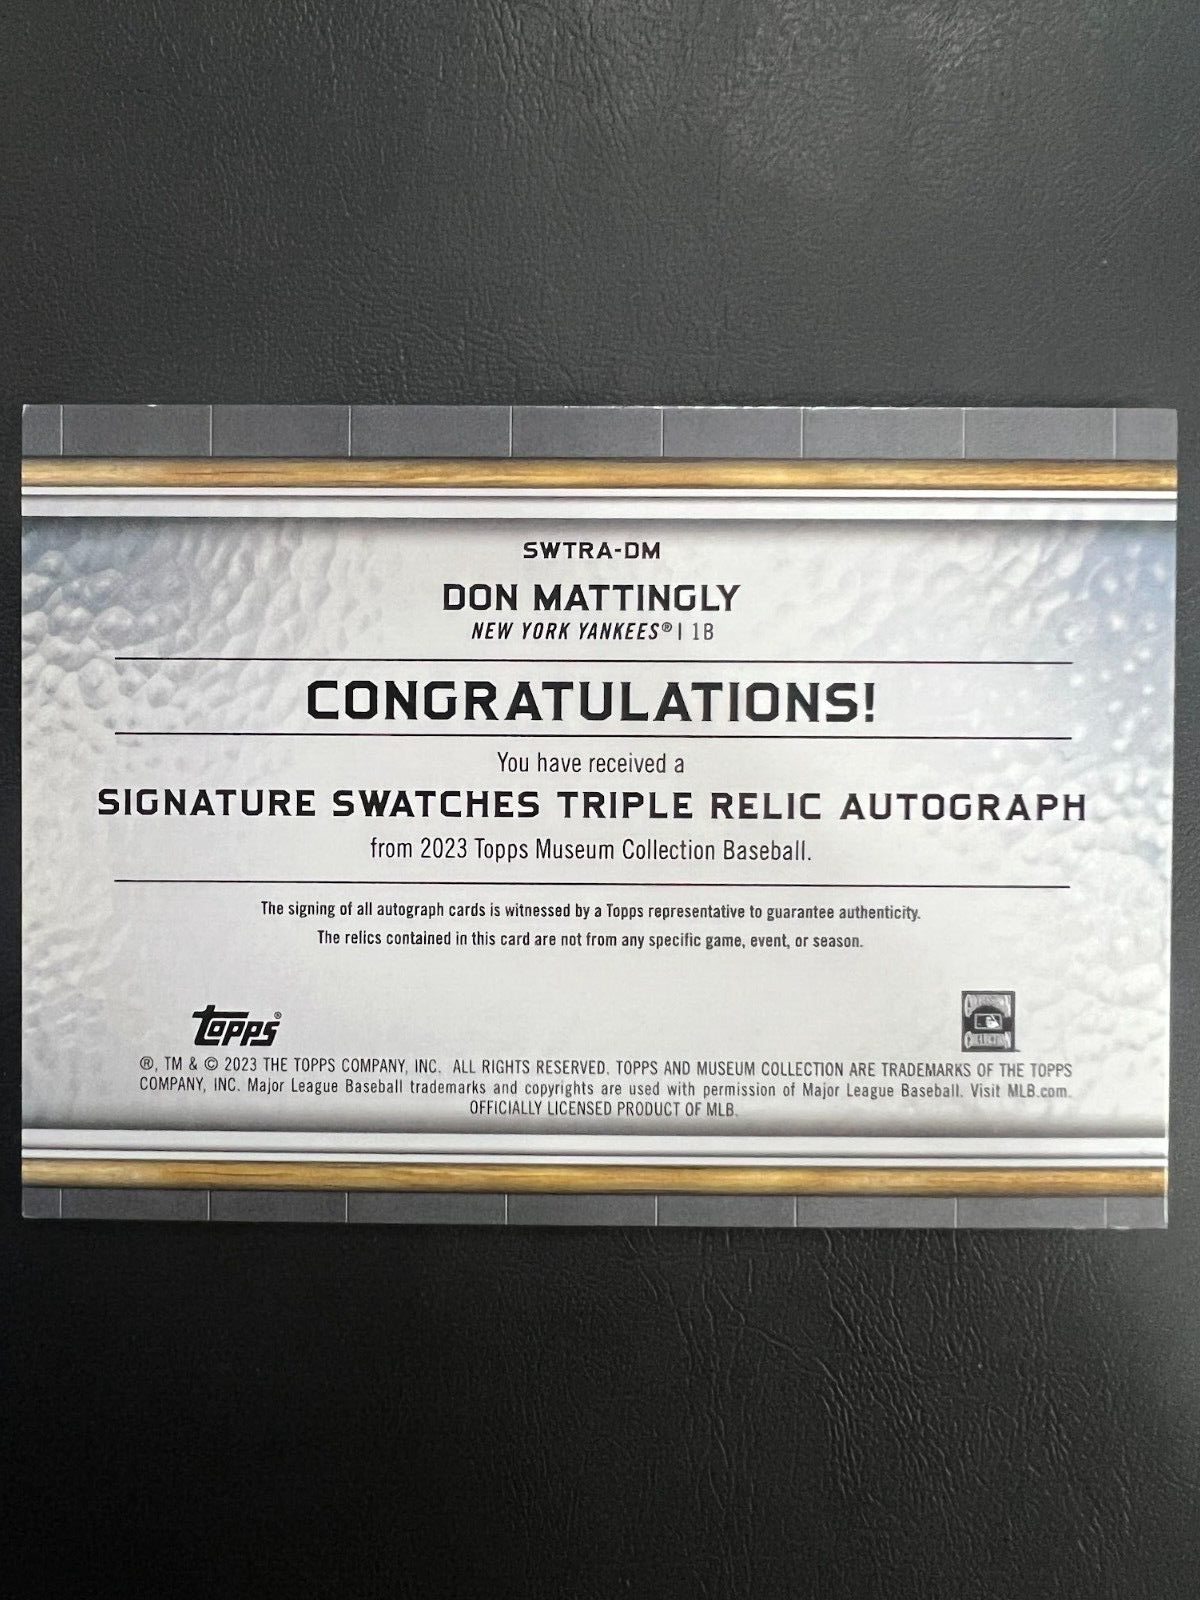 2023 Topps Museum Collection Signatures Swatches Game Bat Don Mattingly #9/25 J